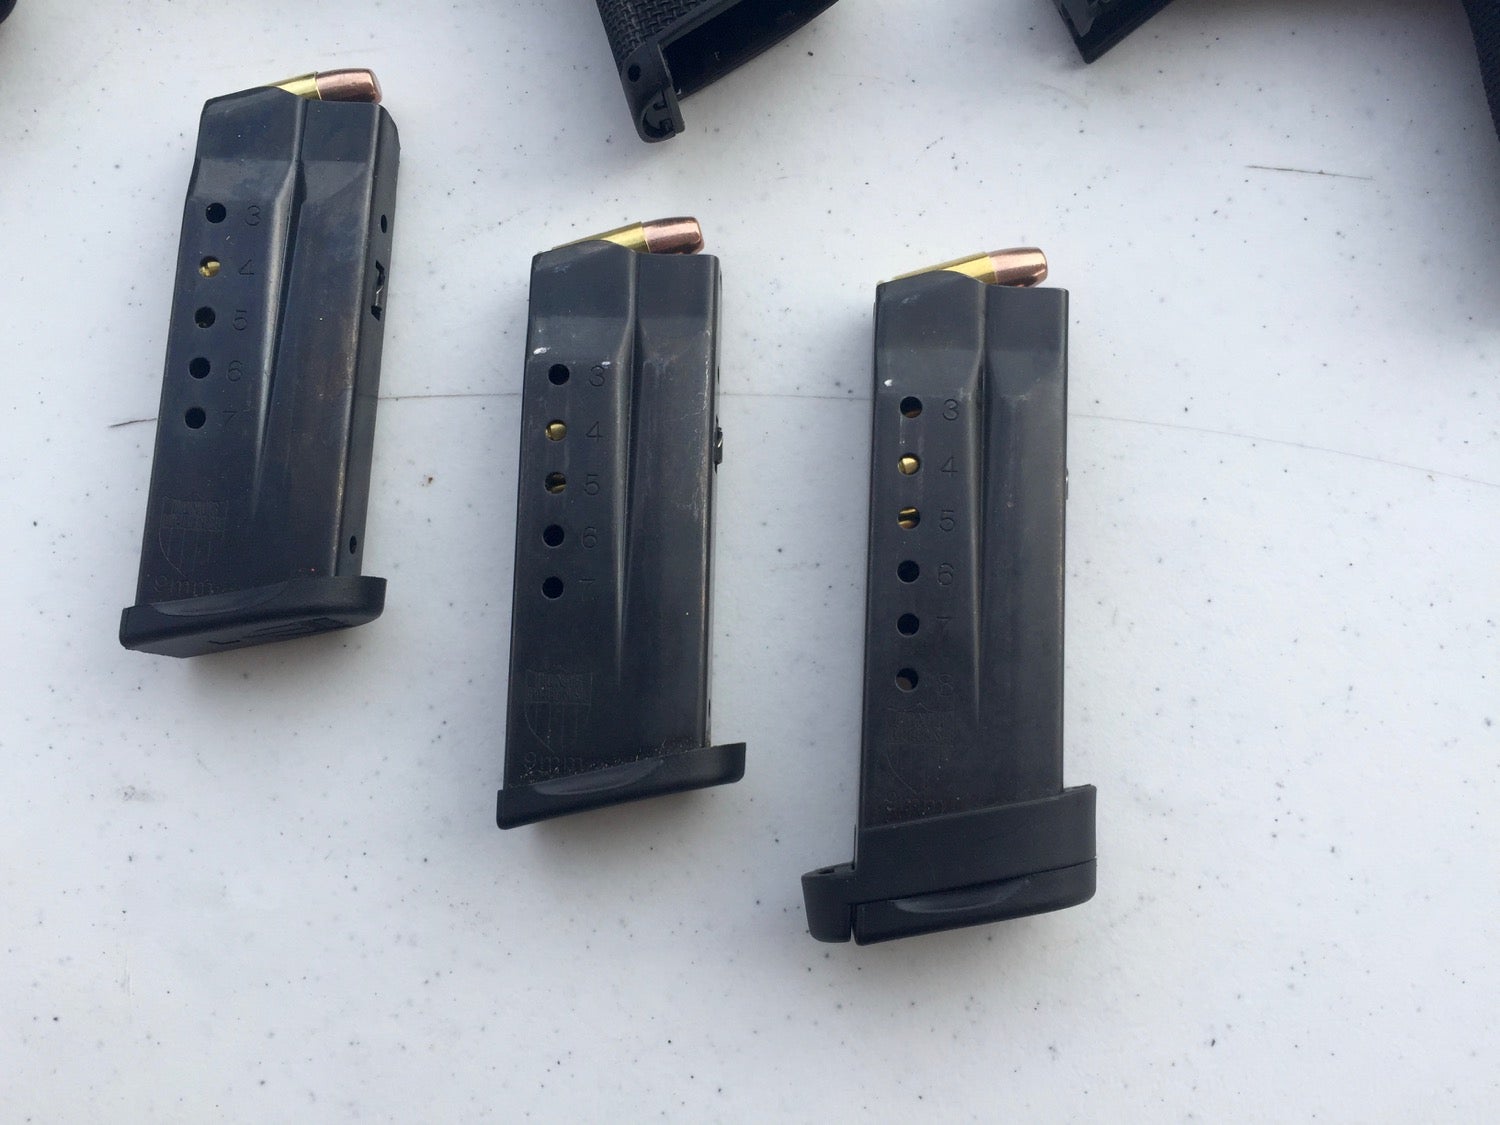 Standard and Extended magazines.